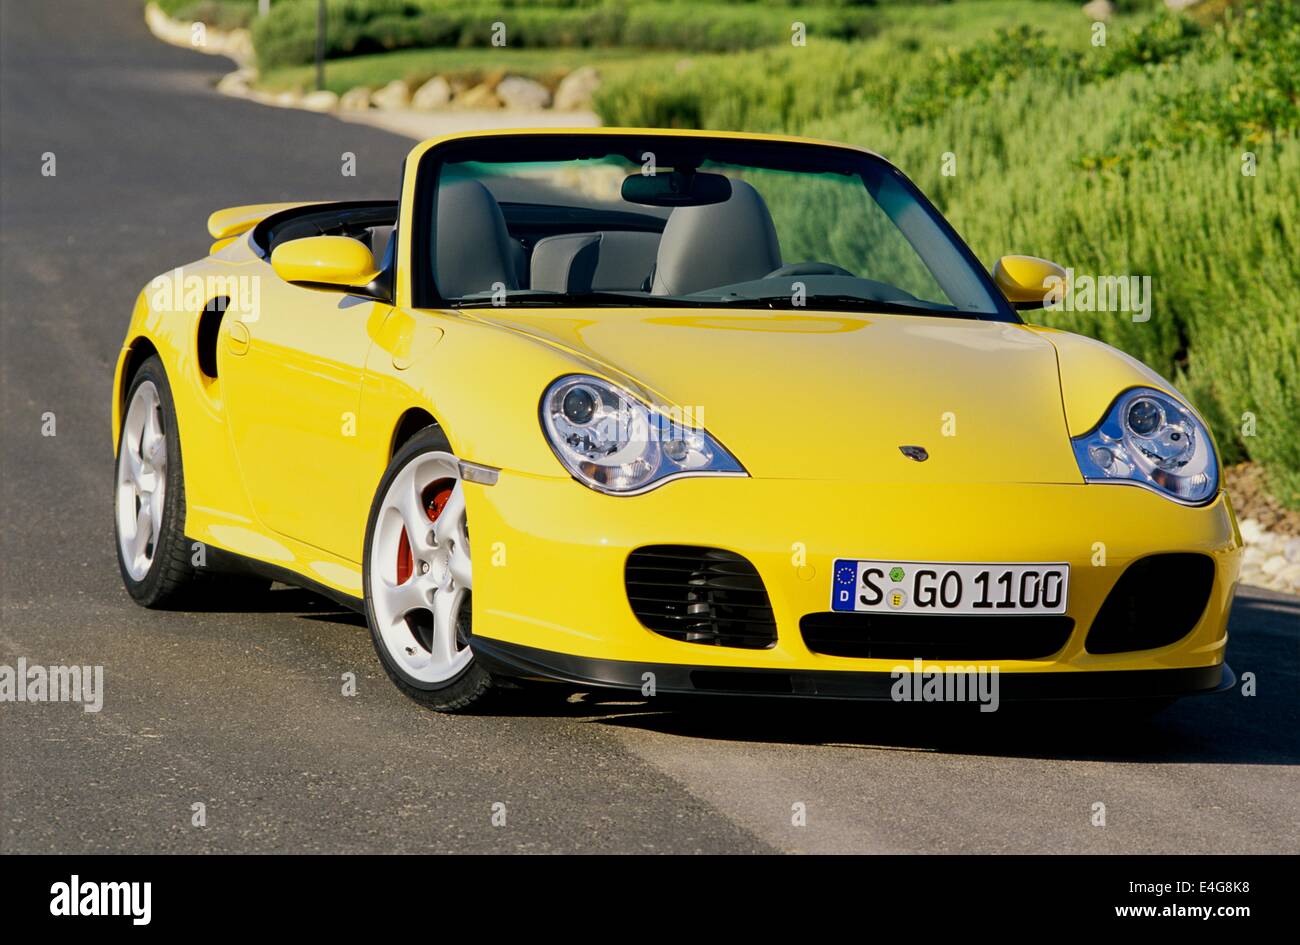 Porsche 911 Carrera 4S - 996 Varient - Cabriolet Version in Yellow  convertible - showing front and side view with roof down Stock Photo - Alamy